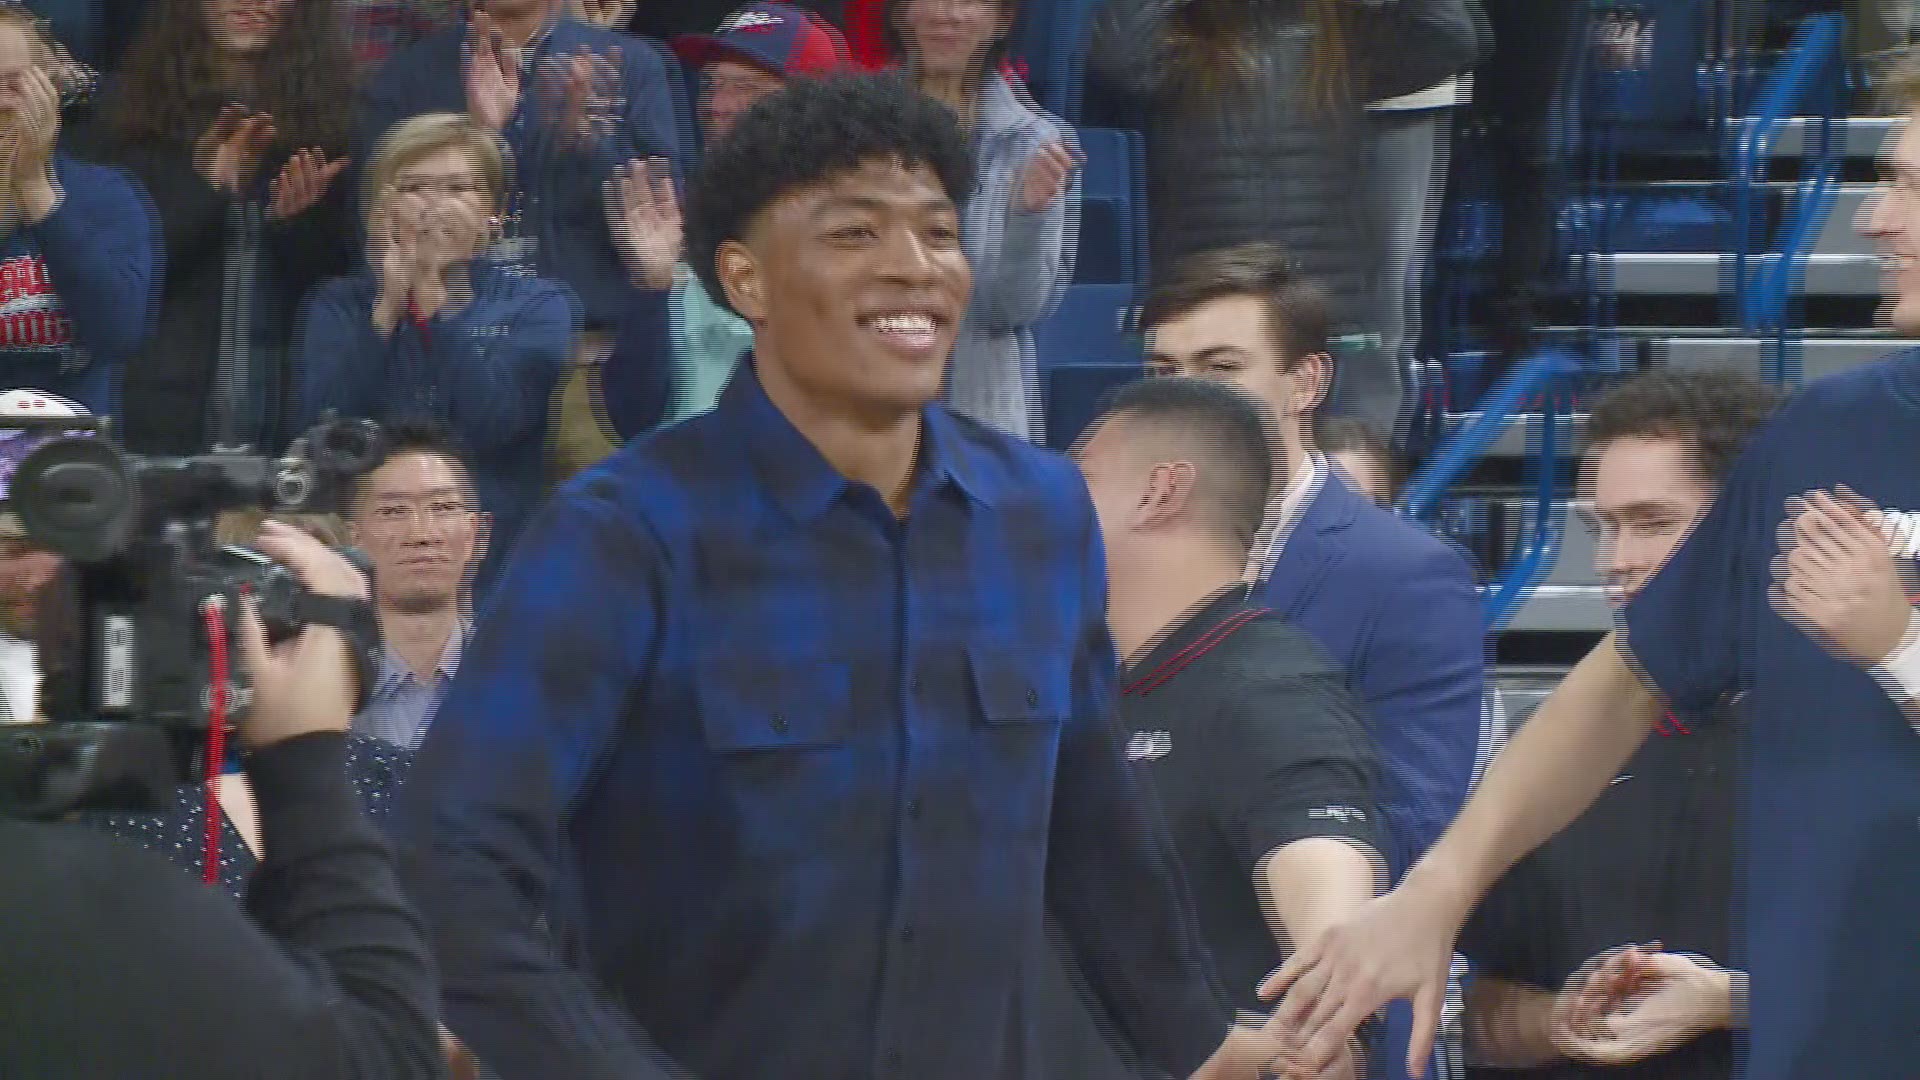 Hachimura was 2019 West Coast Conference Player of the Year.